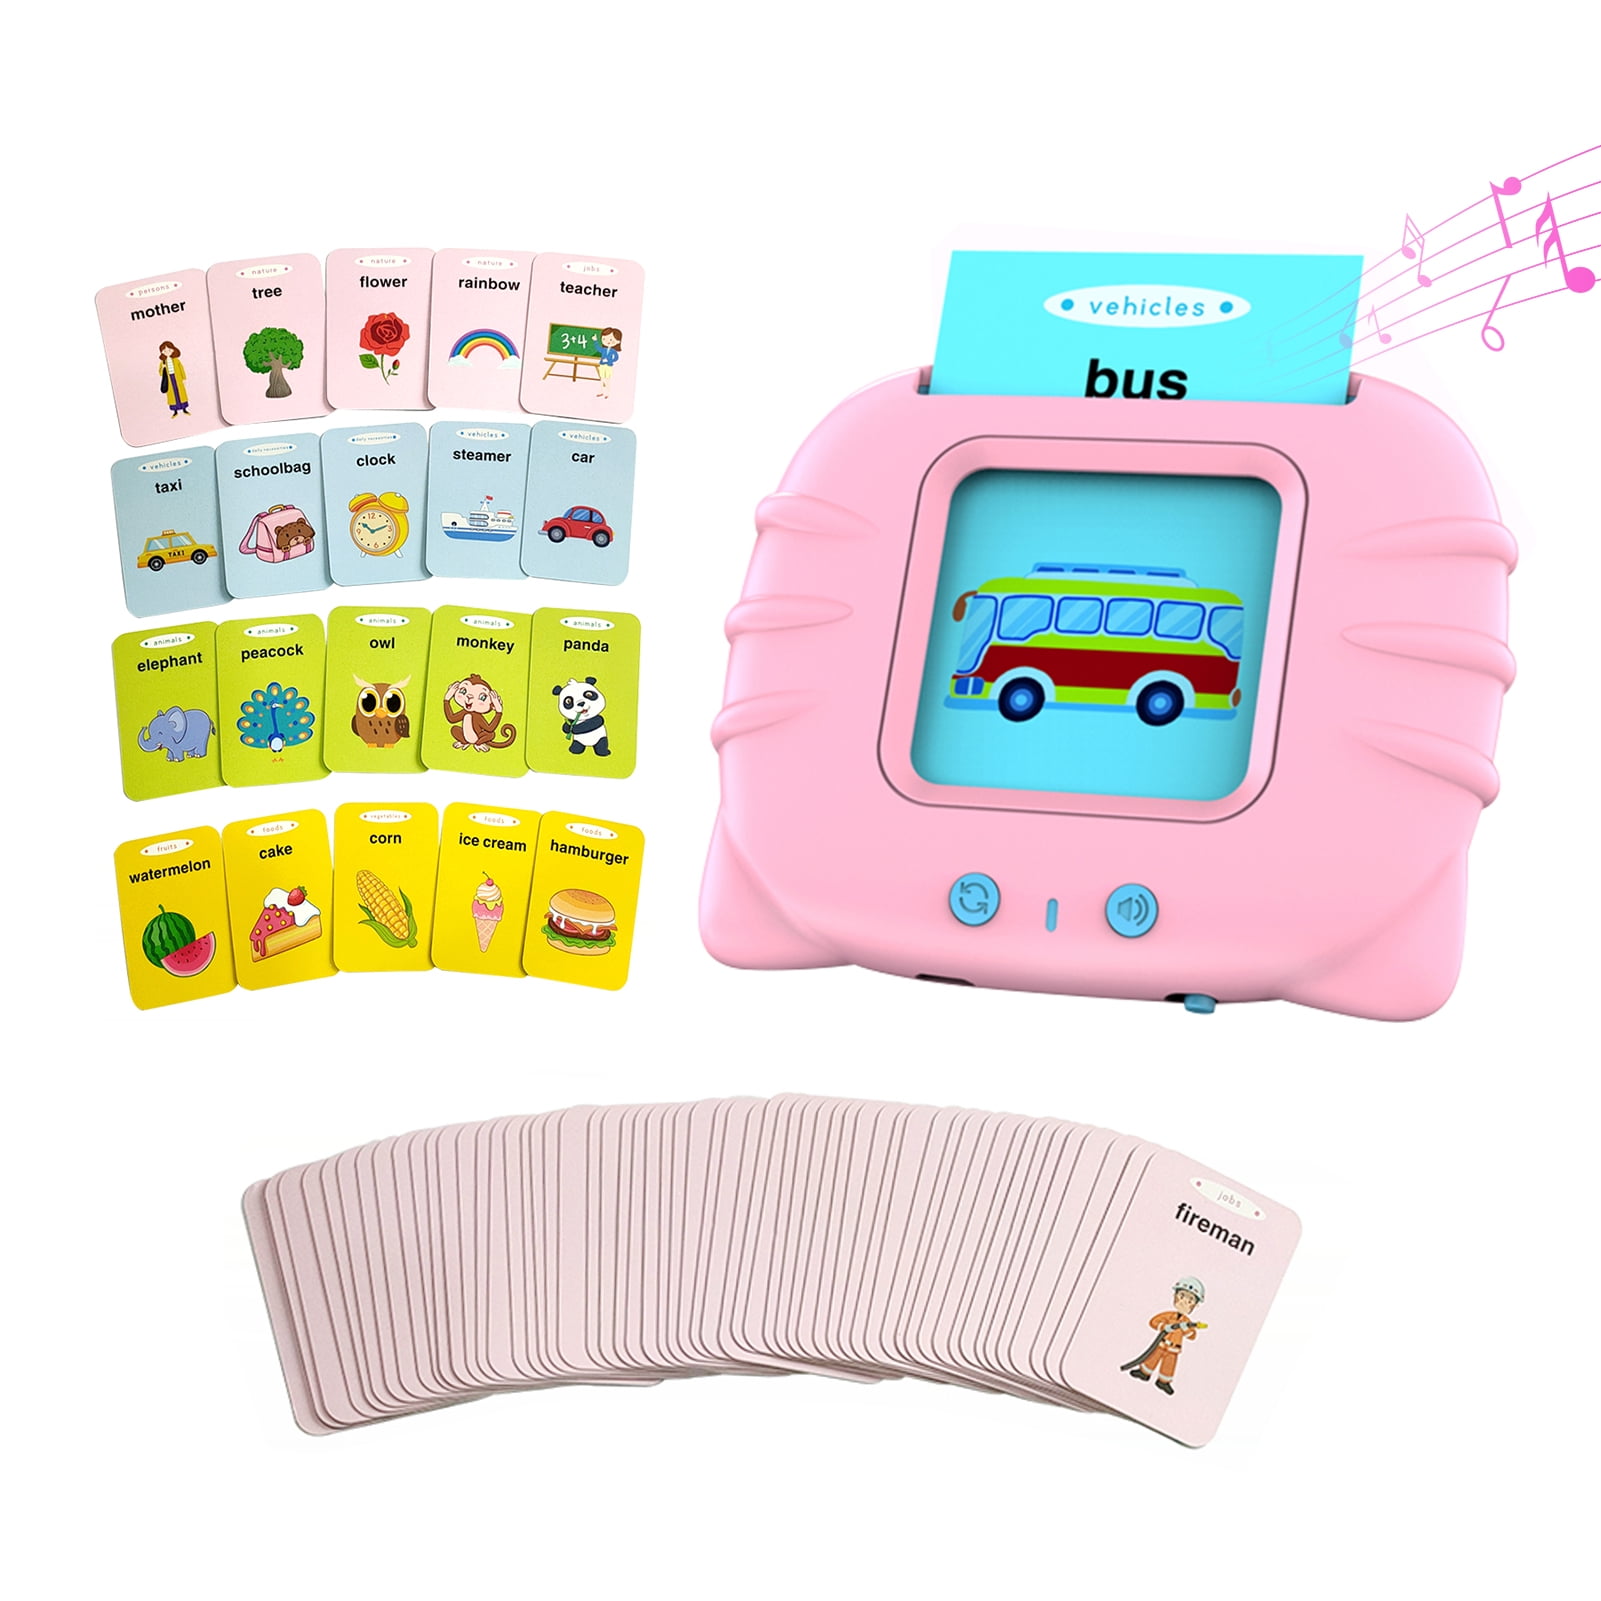 Educational Reading Machine Preschool Montessori Toys for Babies and Kids Richgv Talking Flash Cards Learning Toys for 1 2 3 4 5 6 Year Old Boys Girls 112 Flashcard with 224 Sight Words 